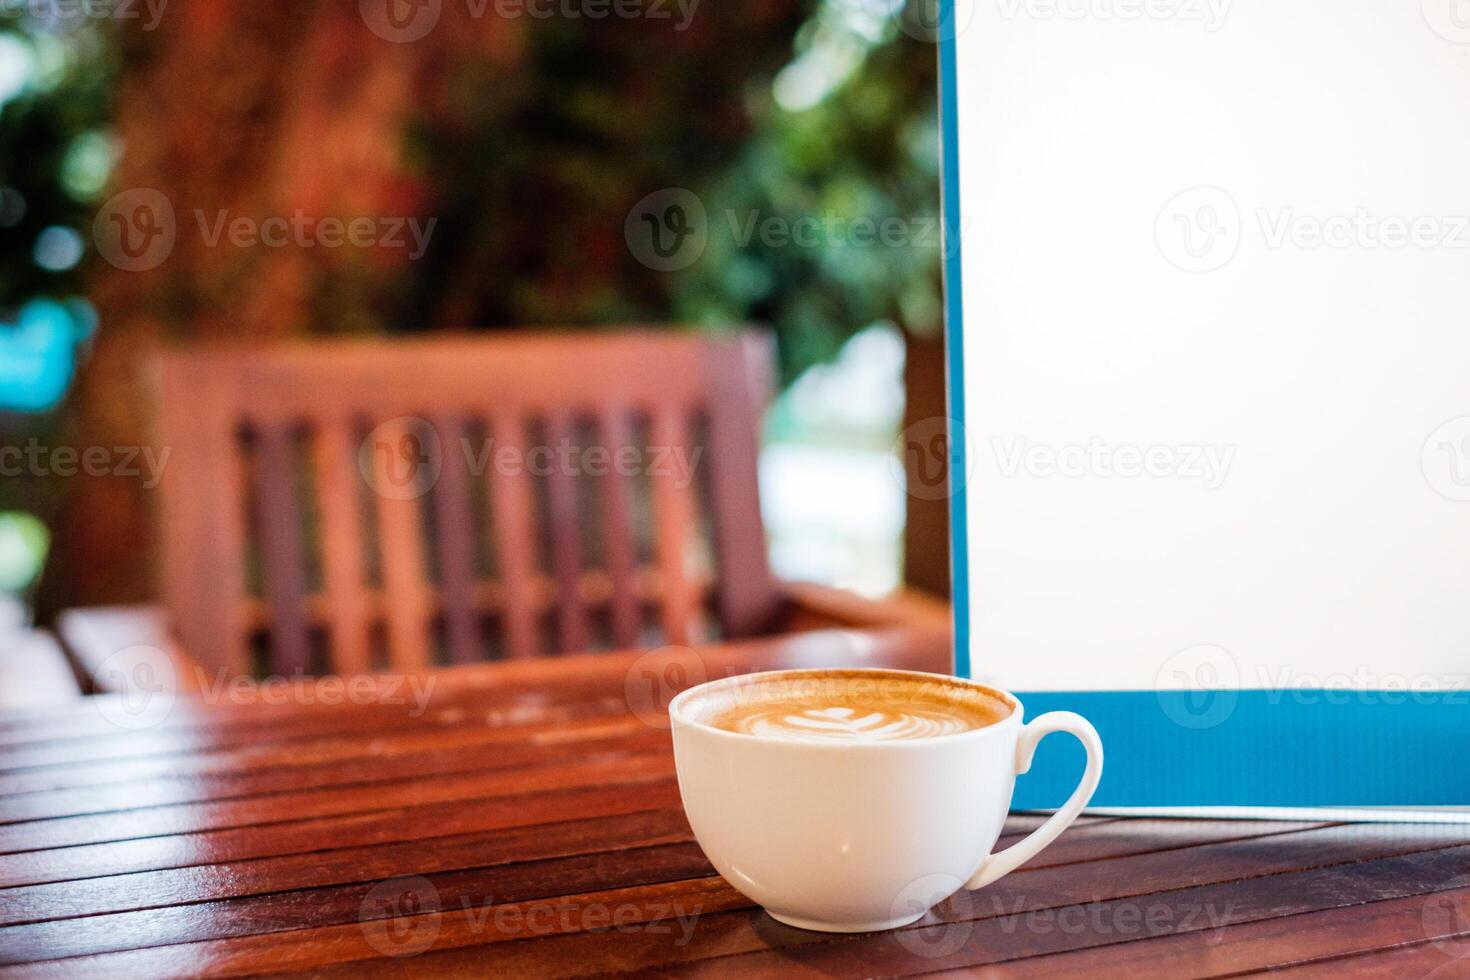 White coffee latte cup with blank signboard on wooden desk photo